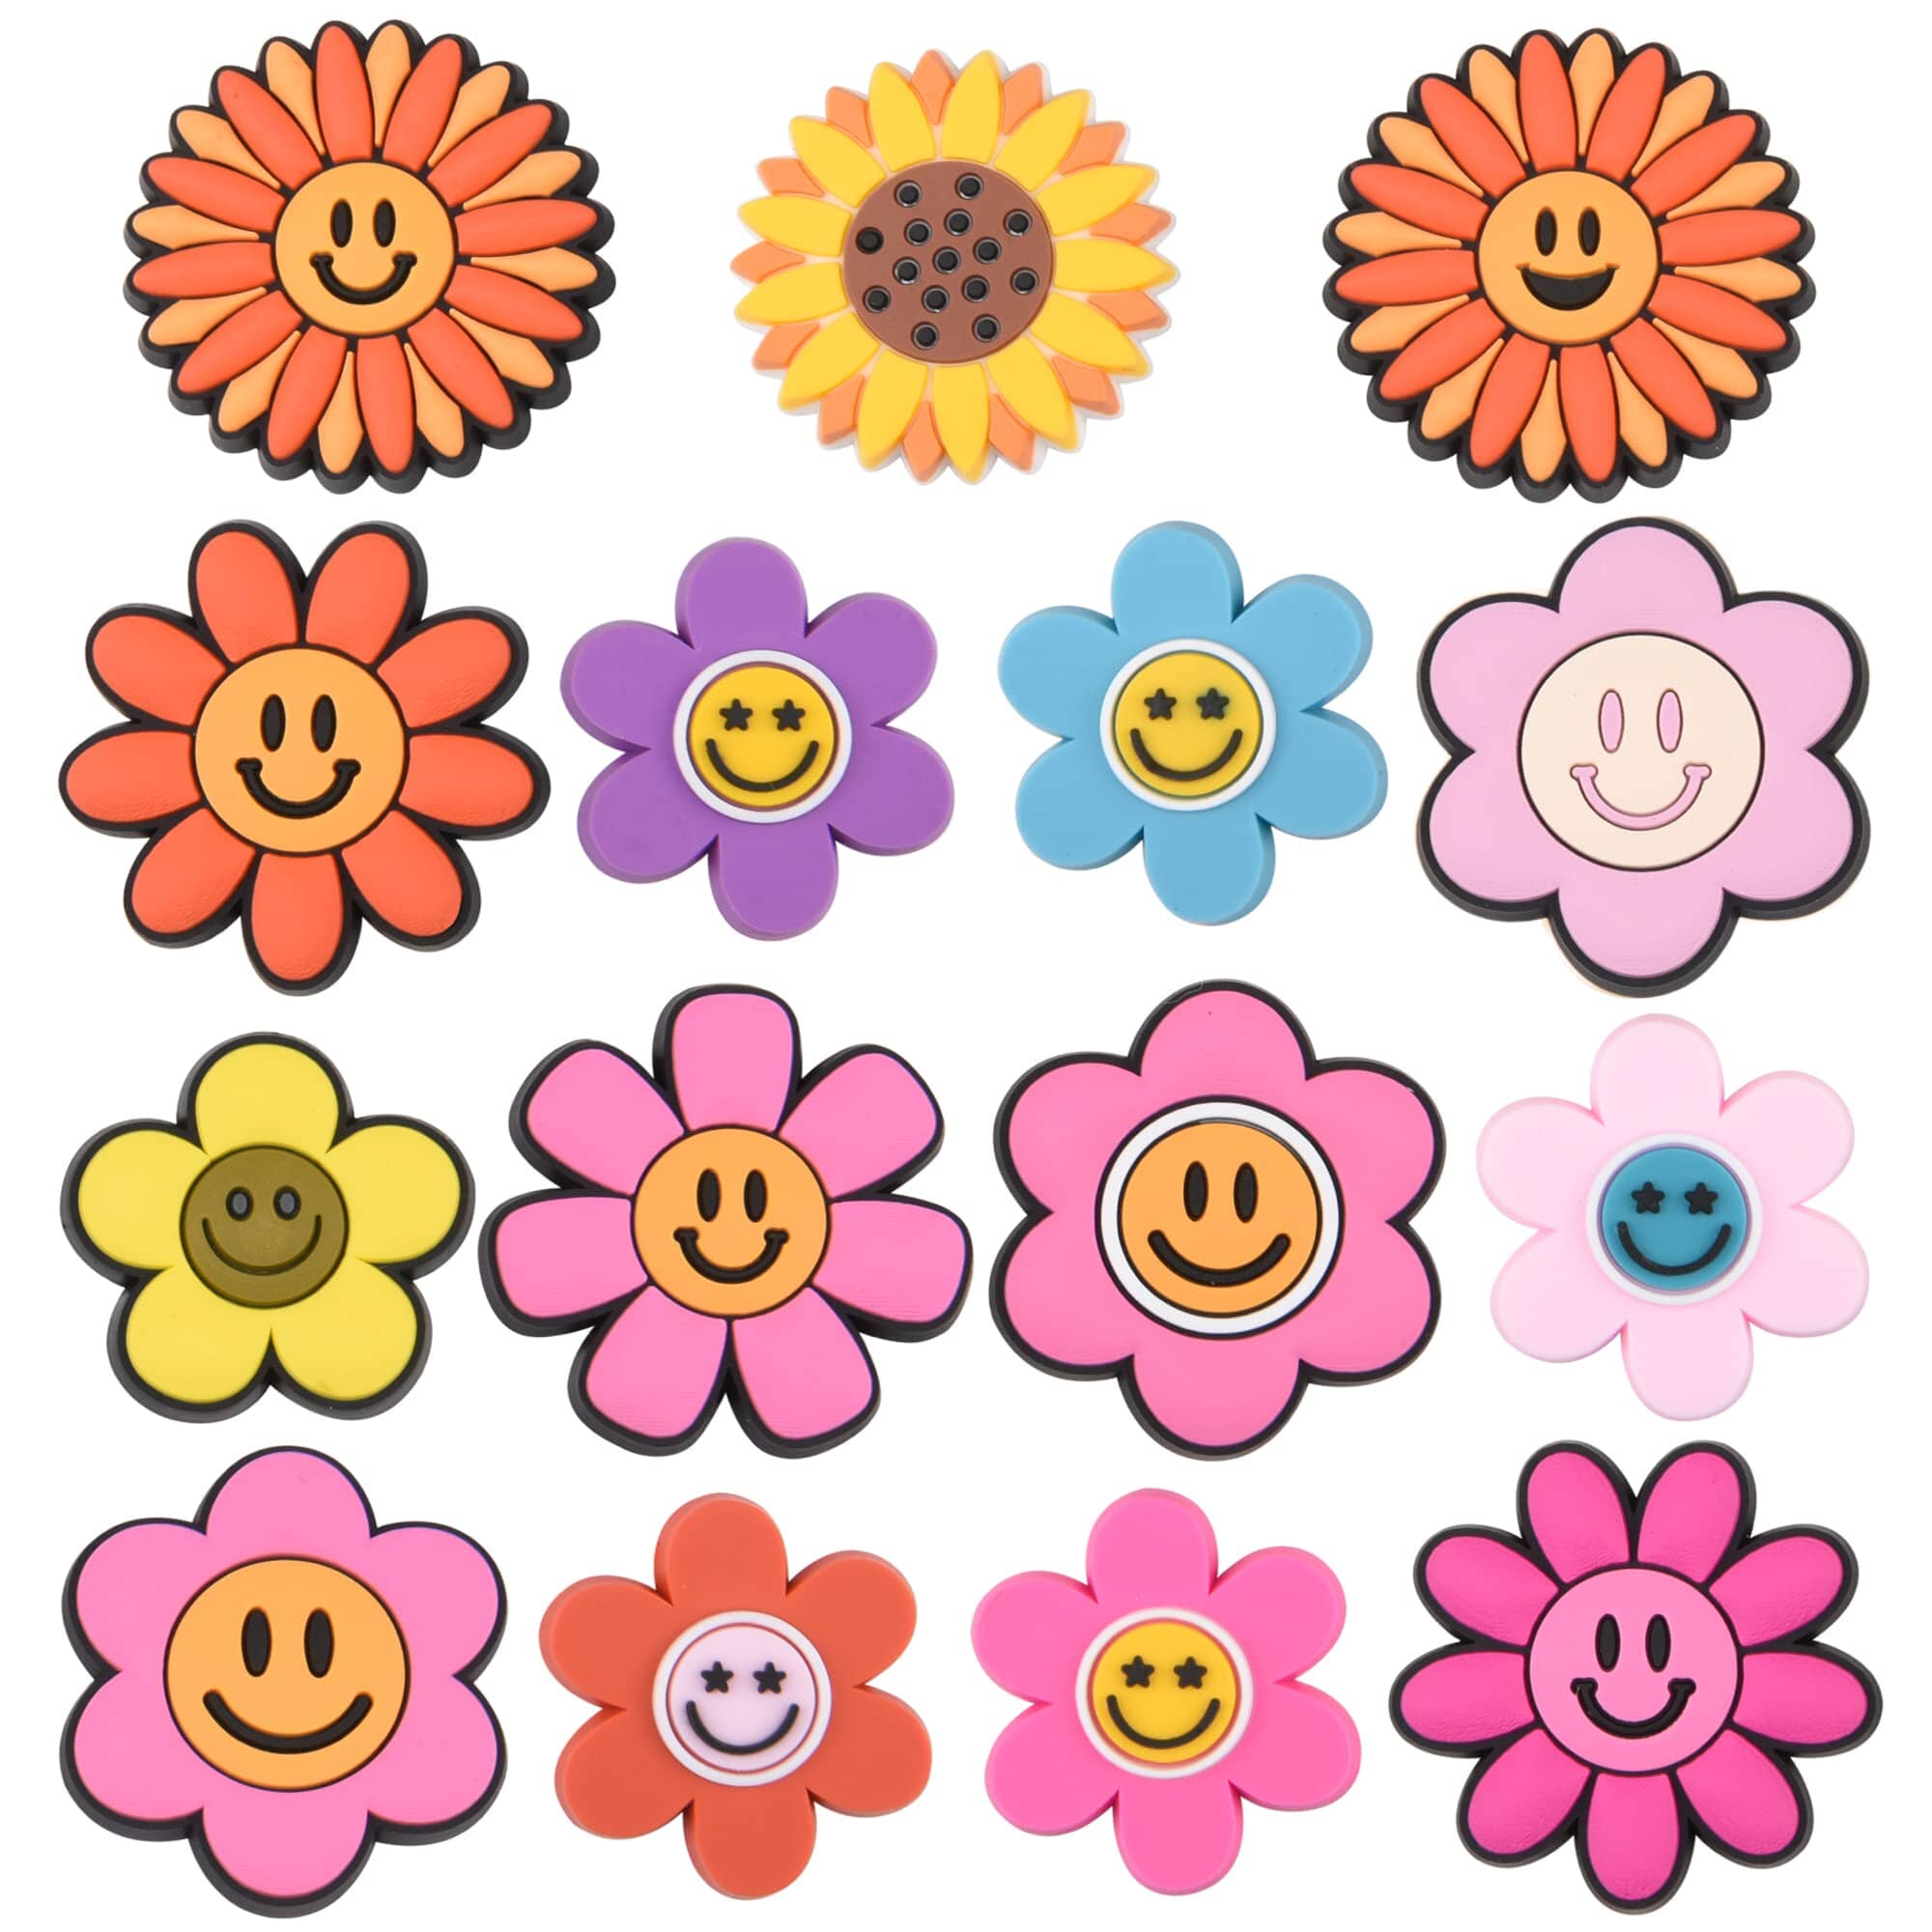 15 Pieces Smile Face Shoe Charms Kids Boys Girls Colorful Flower Shoes Accessories for Party Favor FC15-5 Charms for ClipUp POSHYC 